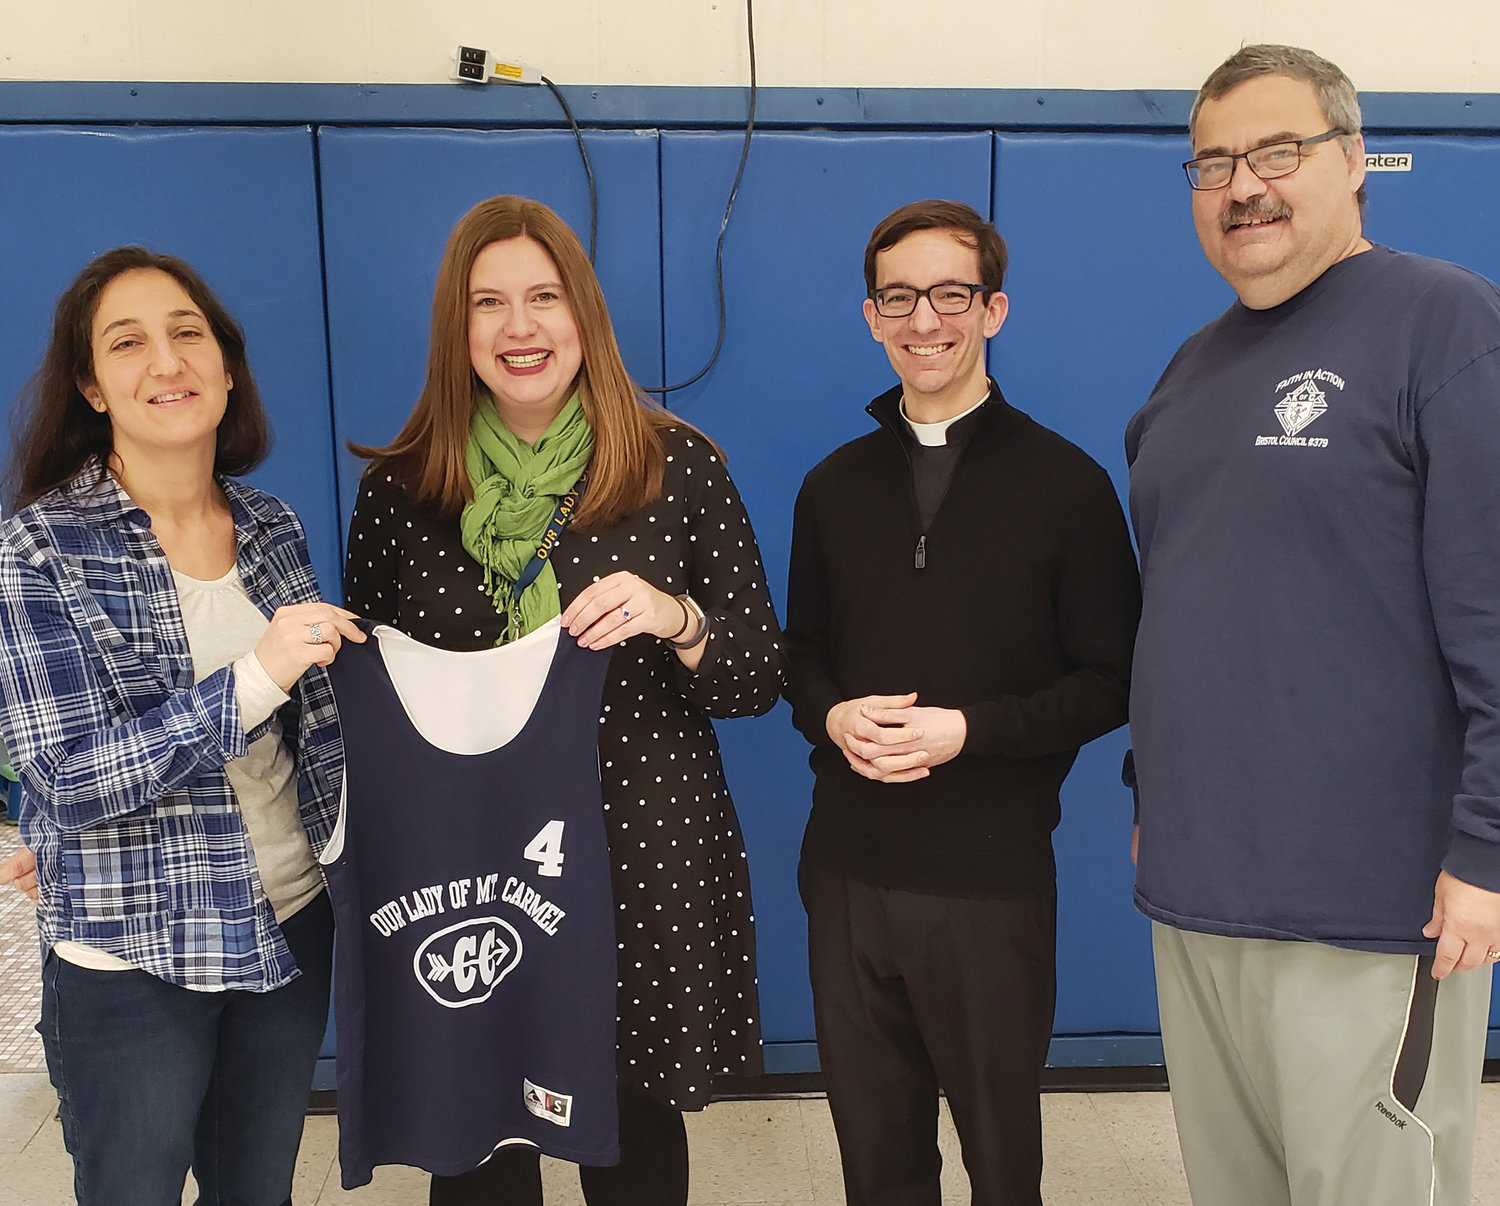 Knights of Columbus Council 379 recently organized a pasta dinner and raised the $900 needed to purchase new uniforms for Our Lady of Mount Carmel Cross Country team. Past Grand Knight Warren Rensehausen of Bristol Knights is pictured with cross country coach, Julie Torres, principal Jessica Walters and Father Steve Battey, assistant pastor.